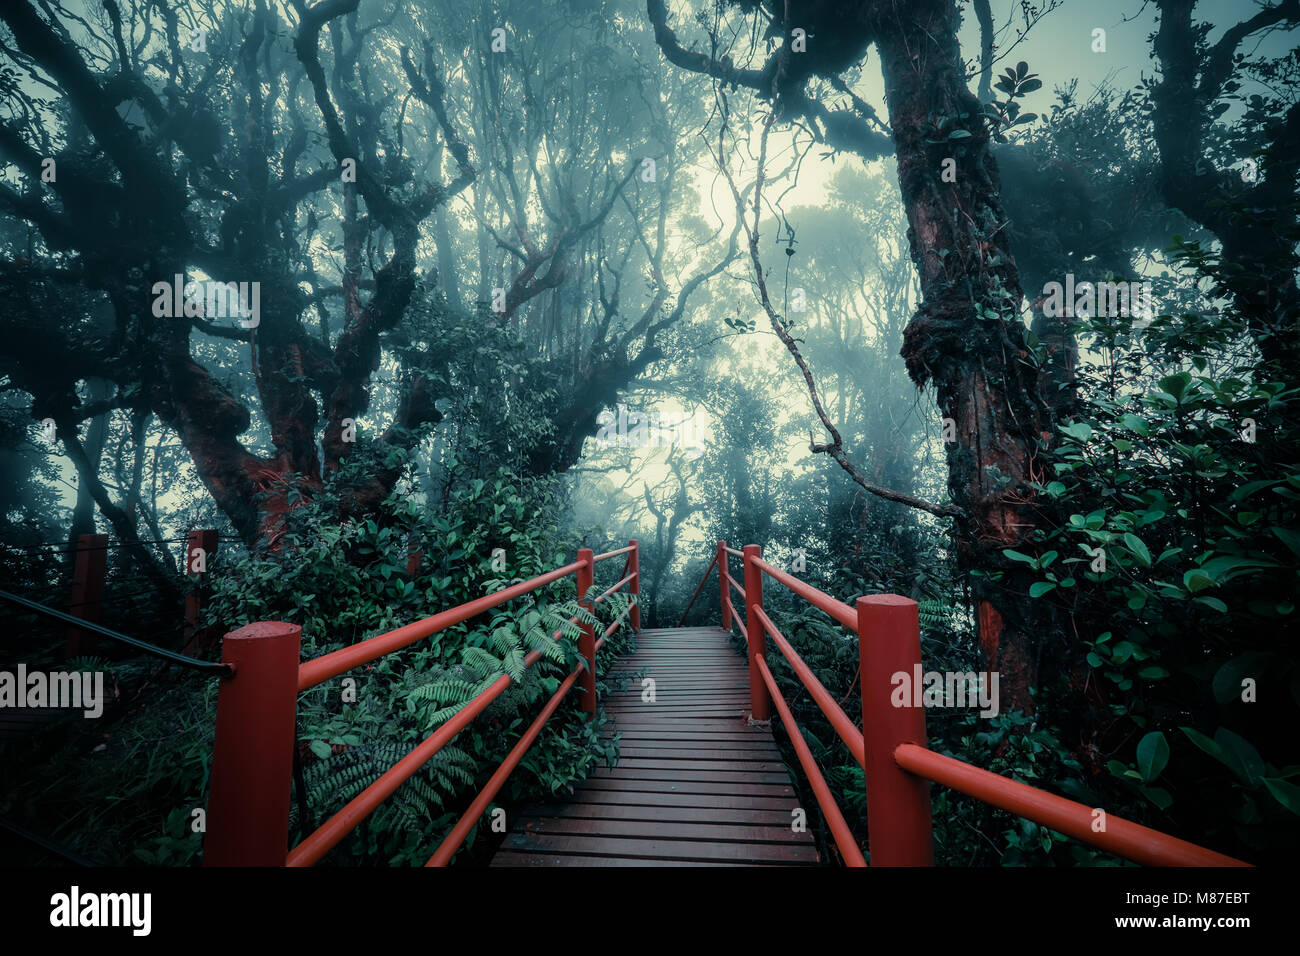 Mysterious landscape of foggy forest with wooden bridge runs through dense foliage. Surreal beauty of exotic trees, thicket of shrubs at tropical jung Stock Photo